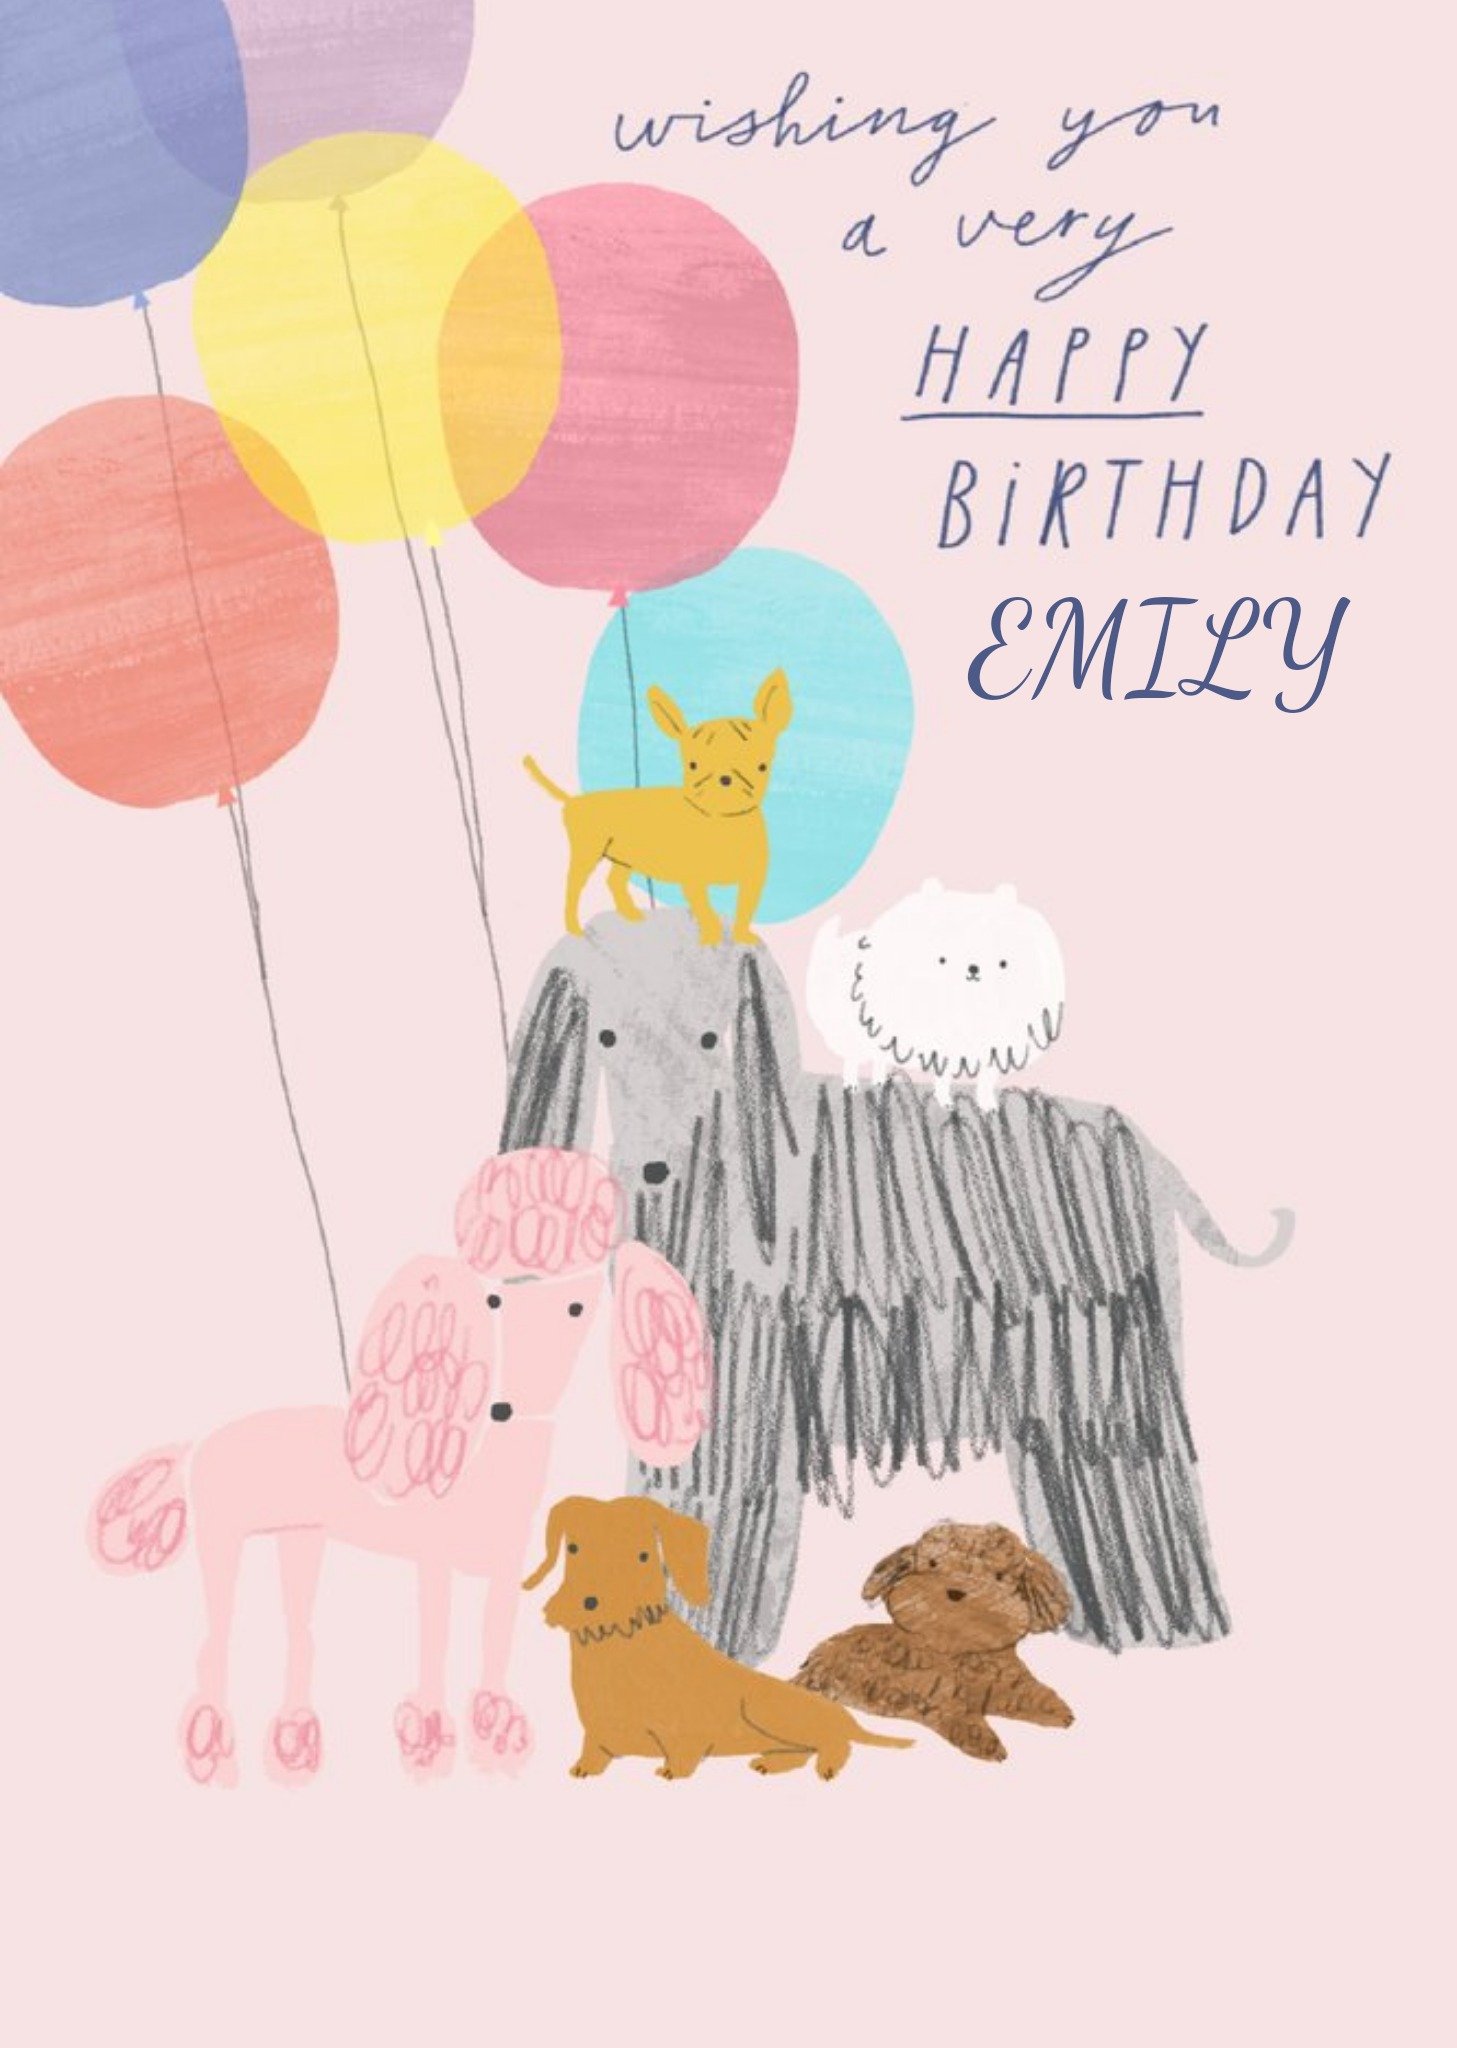 Moonpig Cute Dogs And Balloons Birthday Card, Large